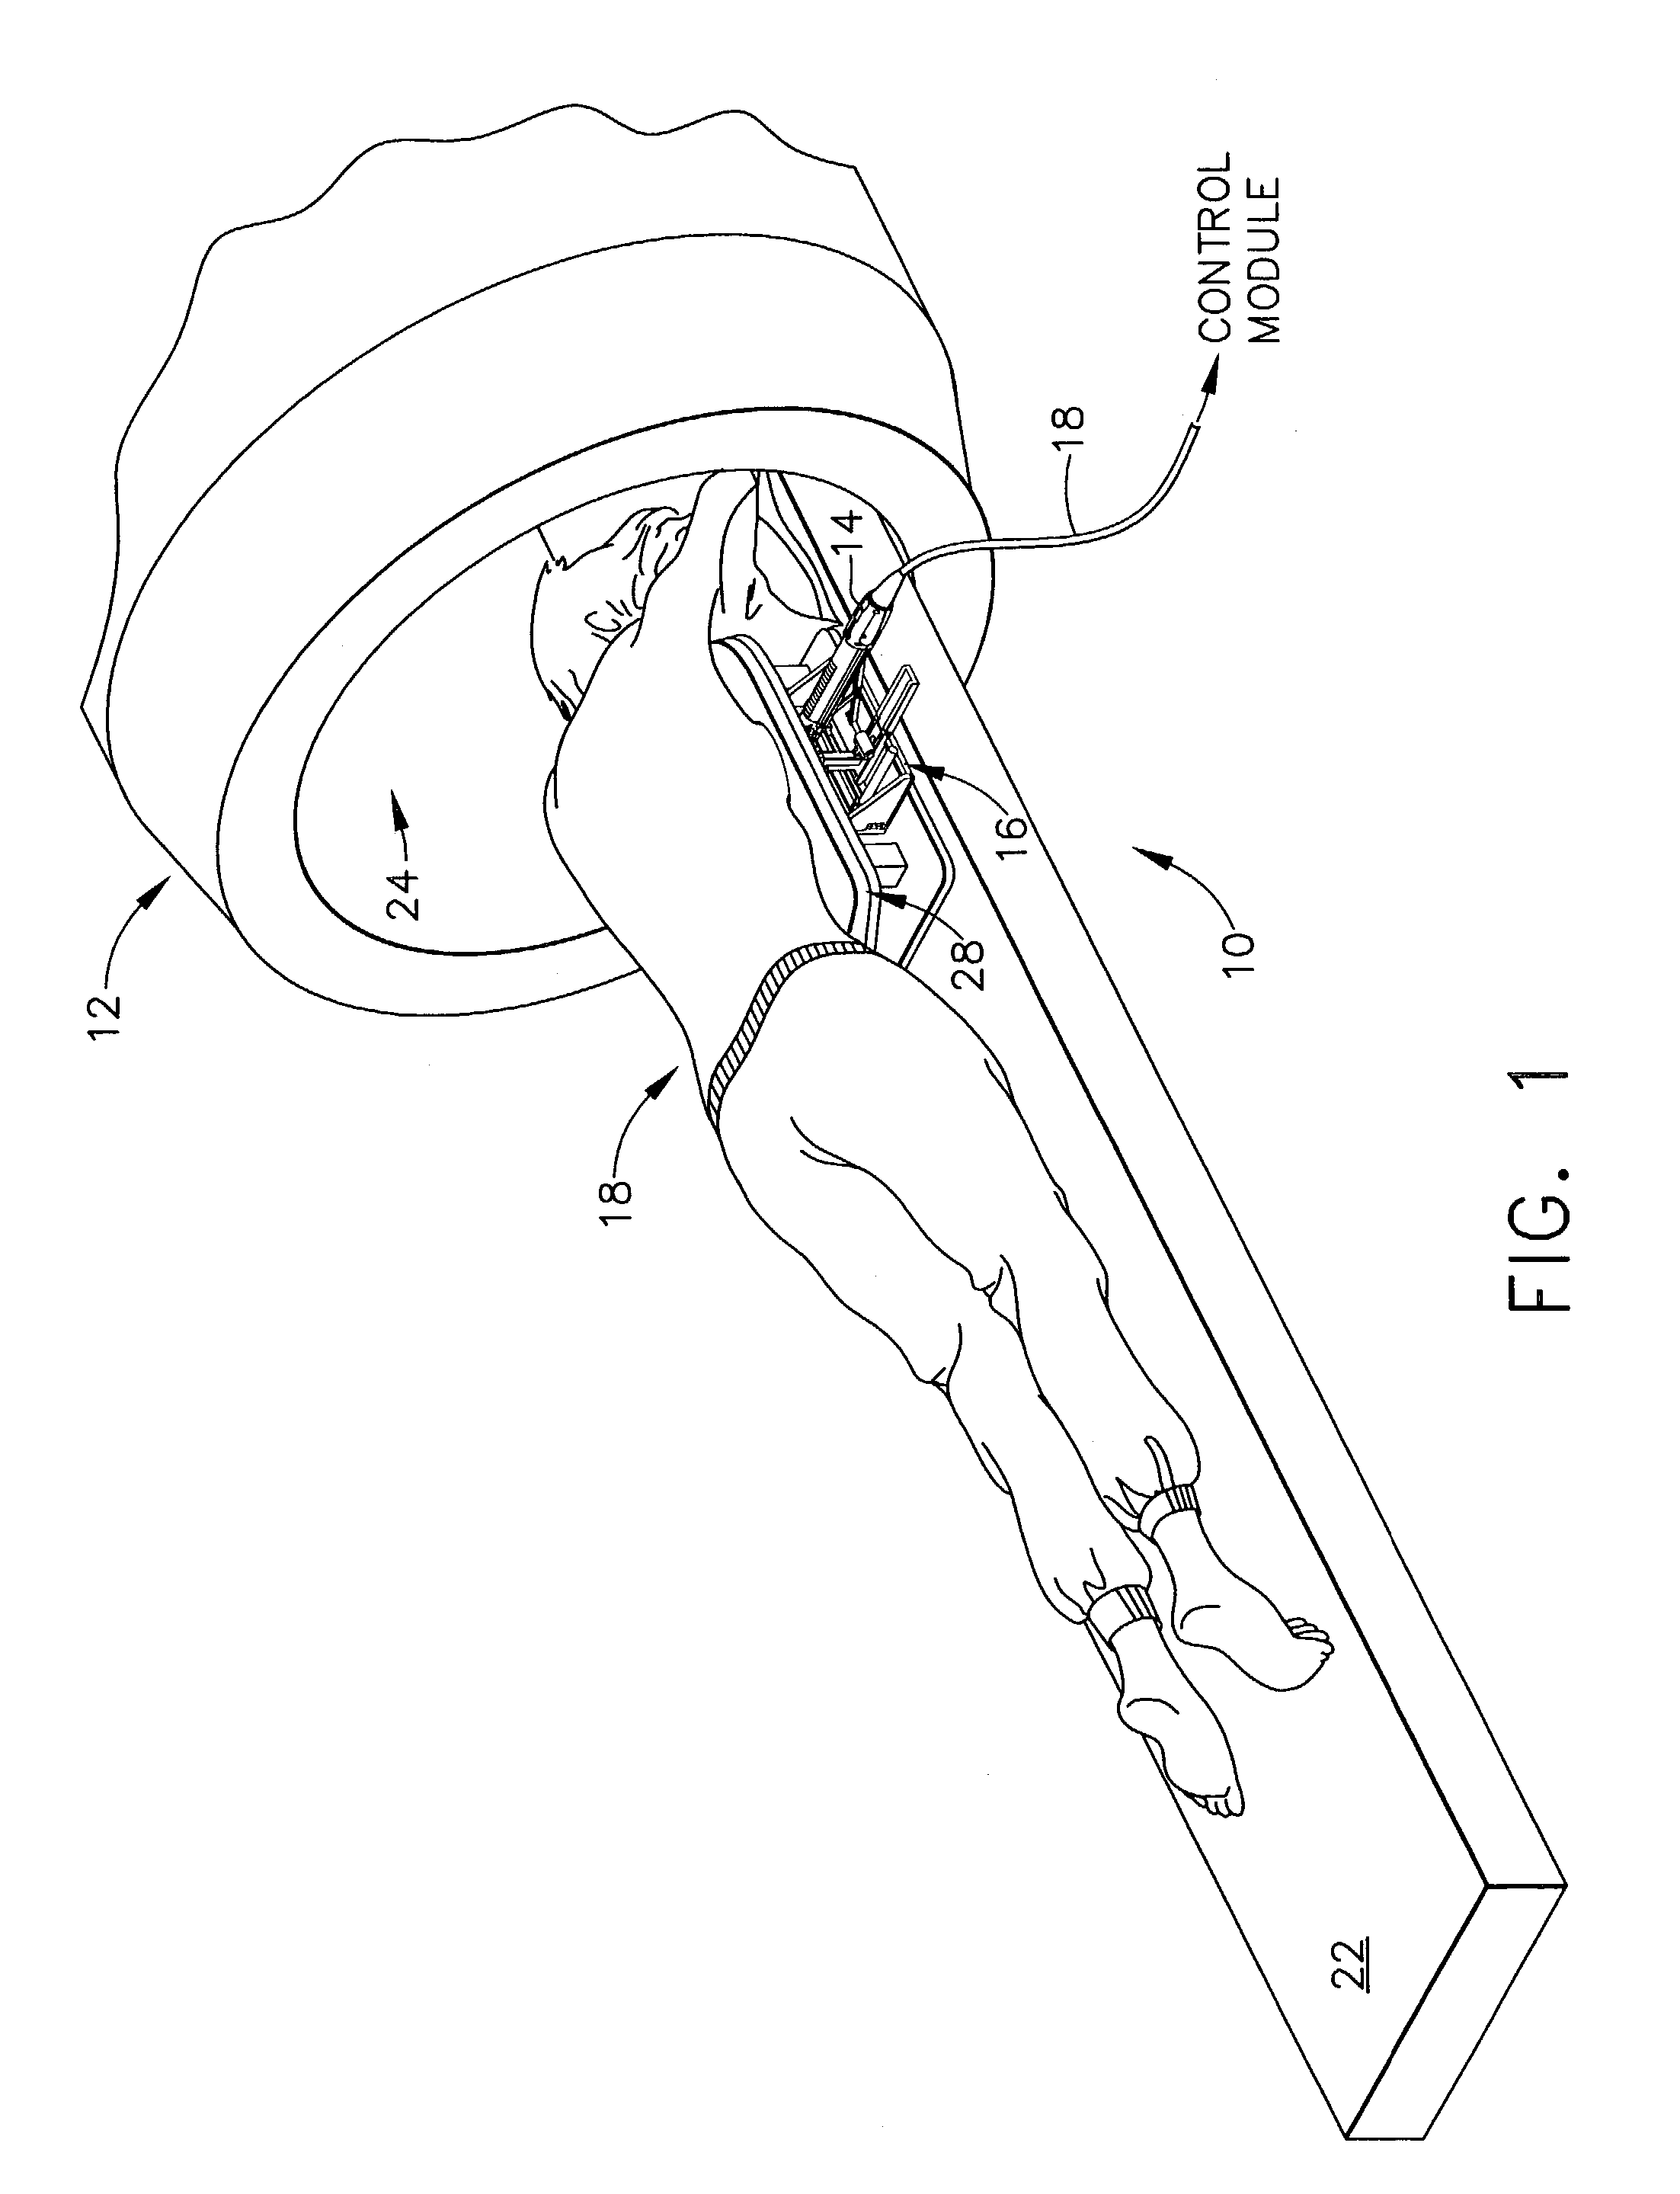 Localization mechanism for an MRI compatible biopsy device